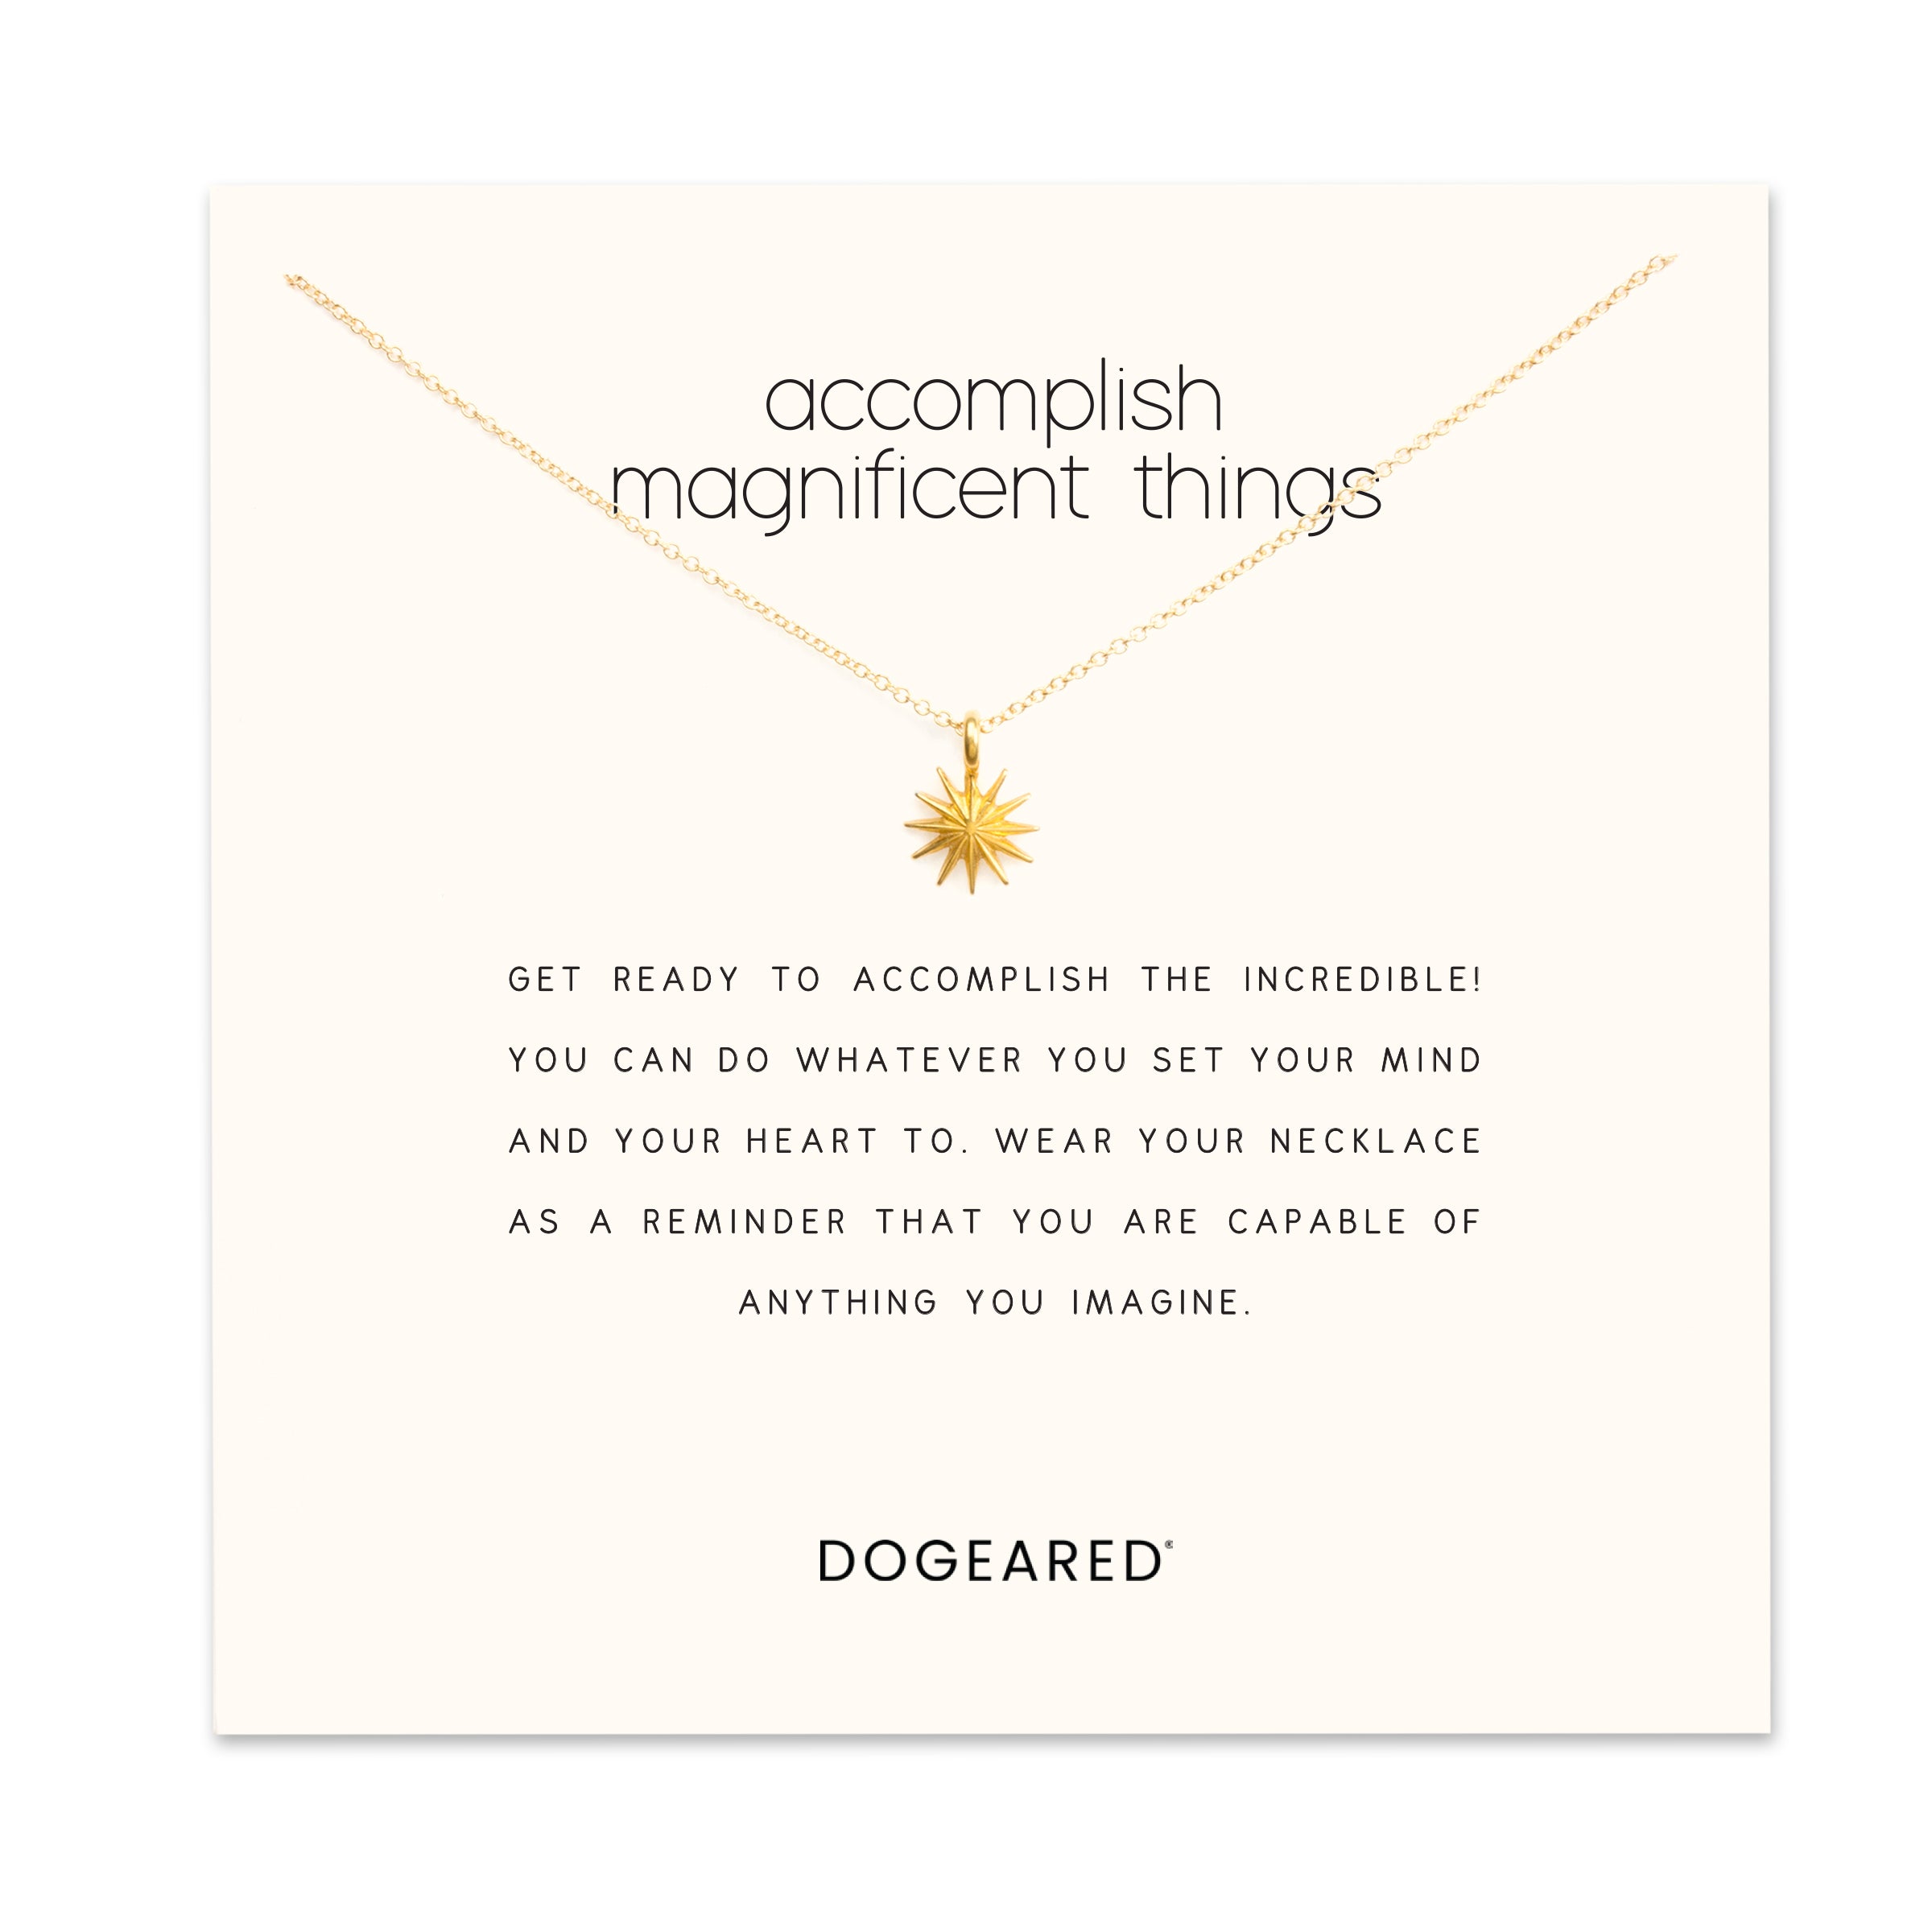 Accomplish magnificent things - Dogeared